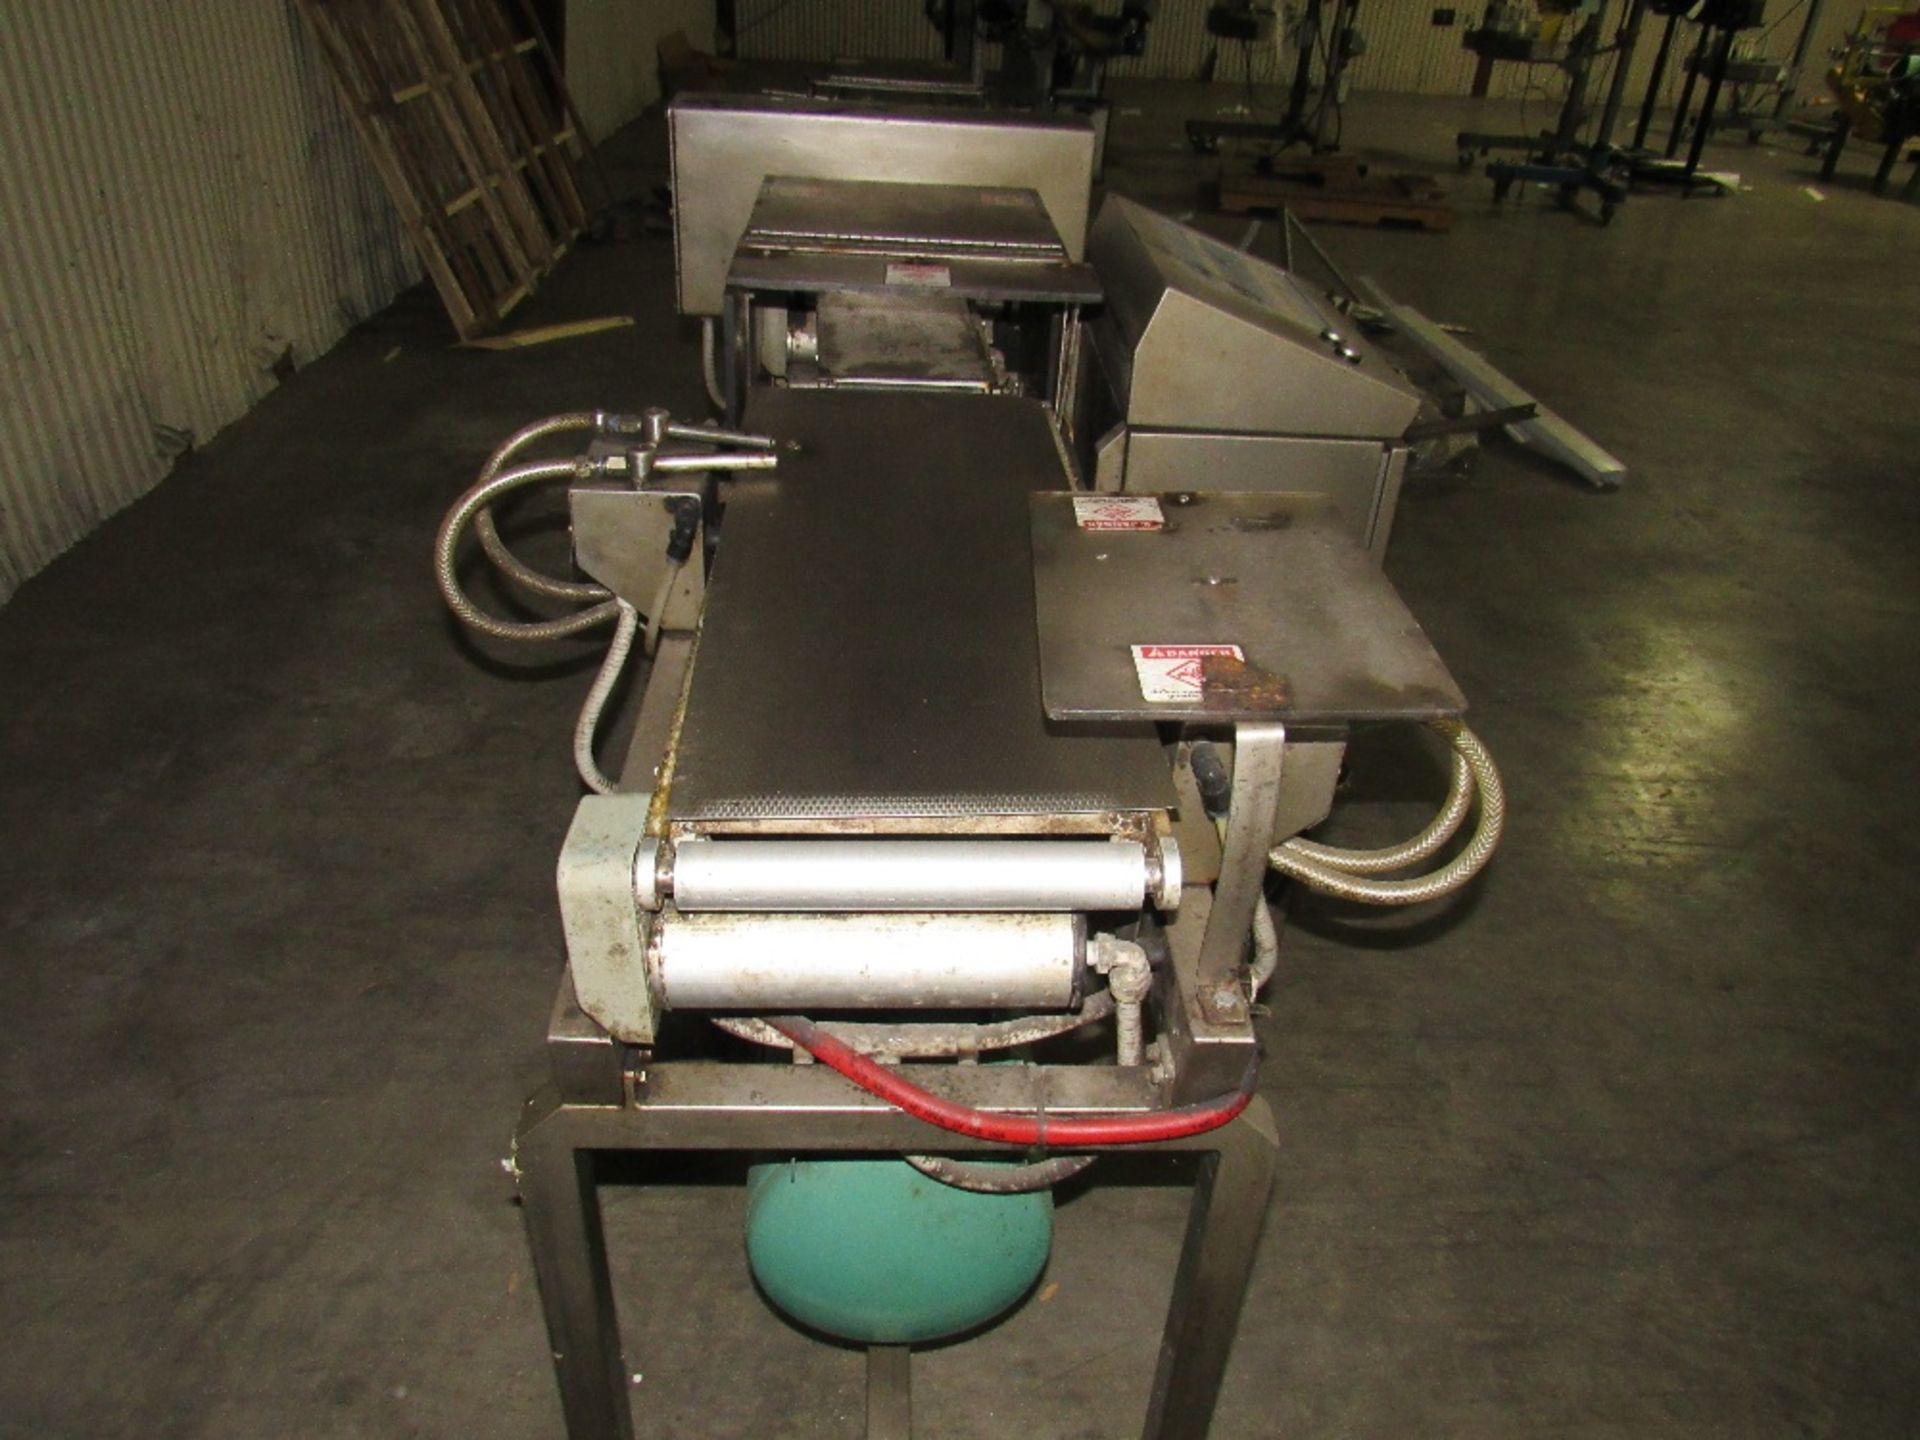 Loma 7000 Staginess Steel Check weigher with built-in 7.5 gallon air tanks and product conveyor - Image 7 of 21